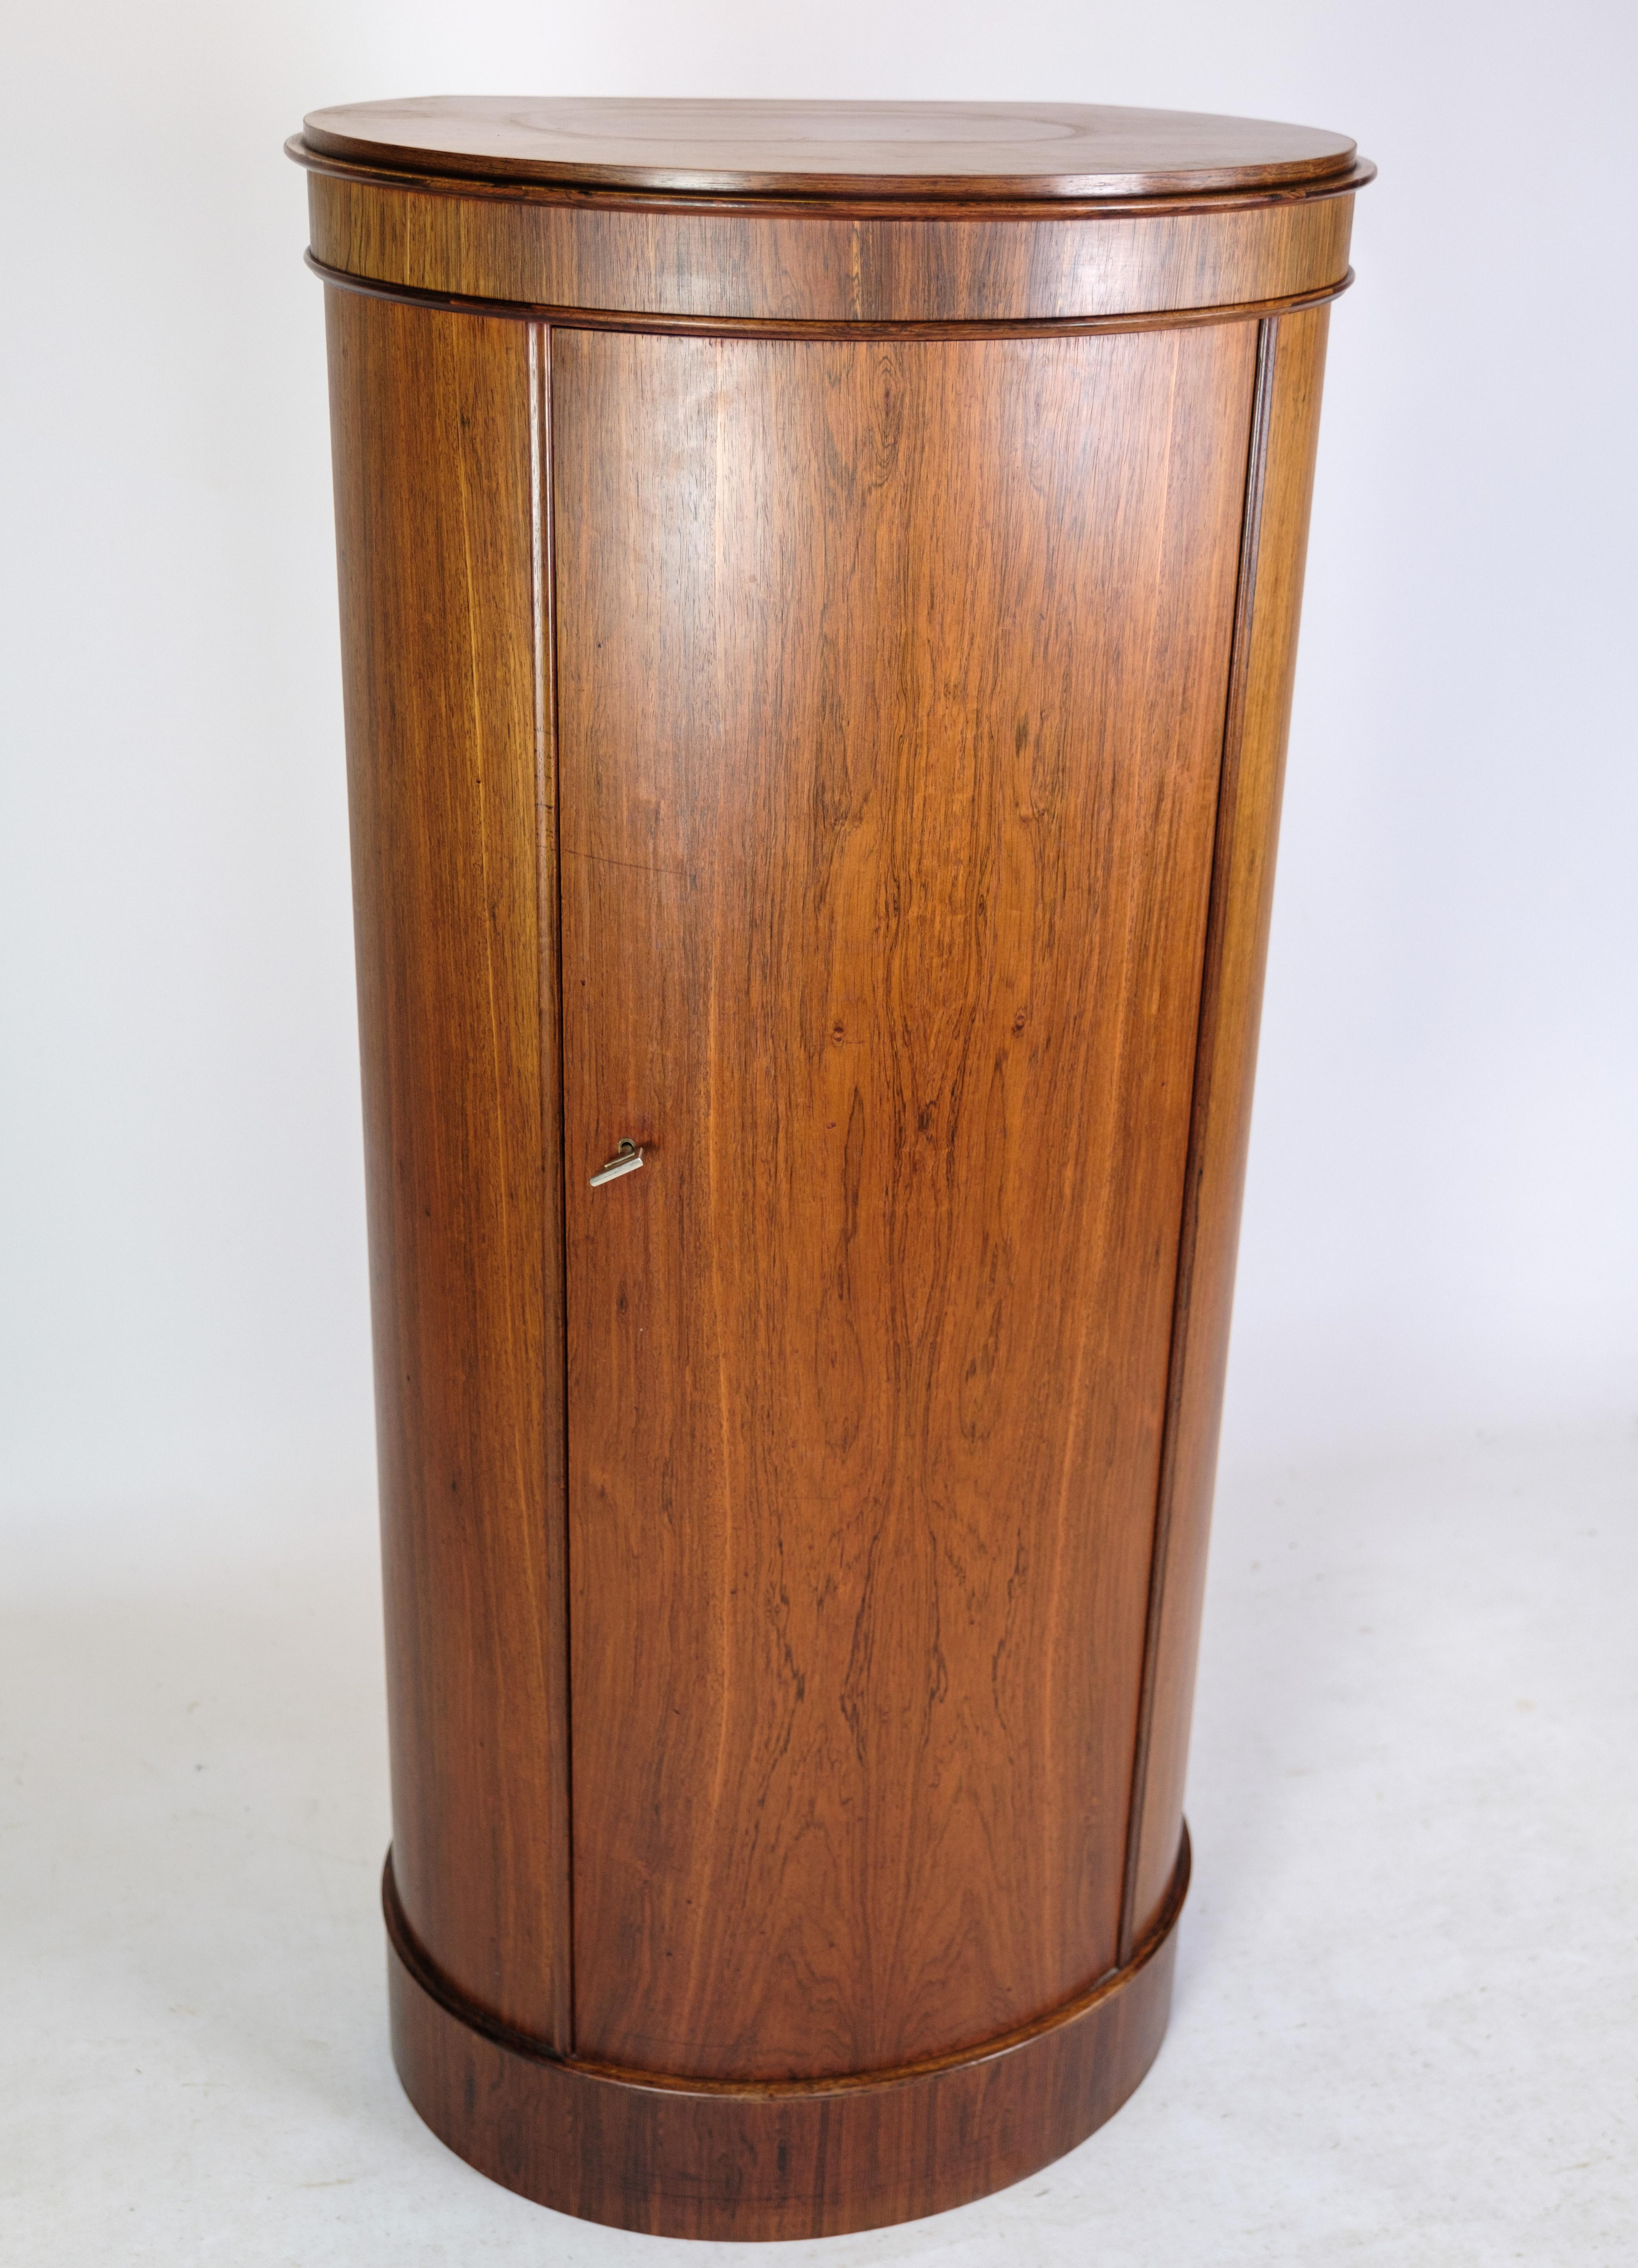 Oval rosewood Pedestal cabinet made of rosewood and designed by Johannes Sorth for Bornholms Møbelfabrik around the 1960s. Incredibly nice condition.
Dimensions in cm: H:130 W:60 D:42